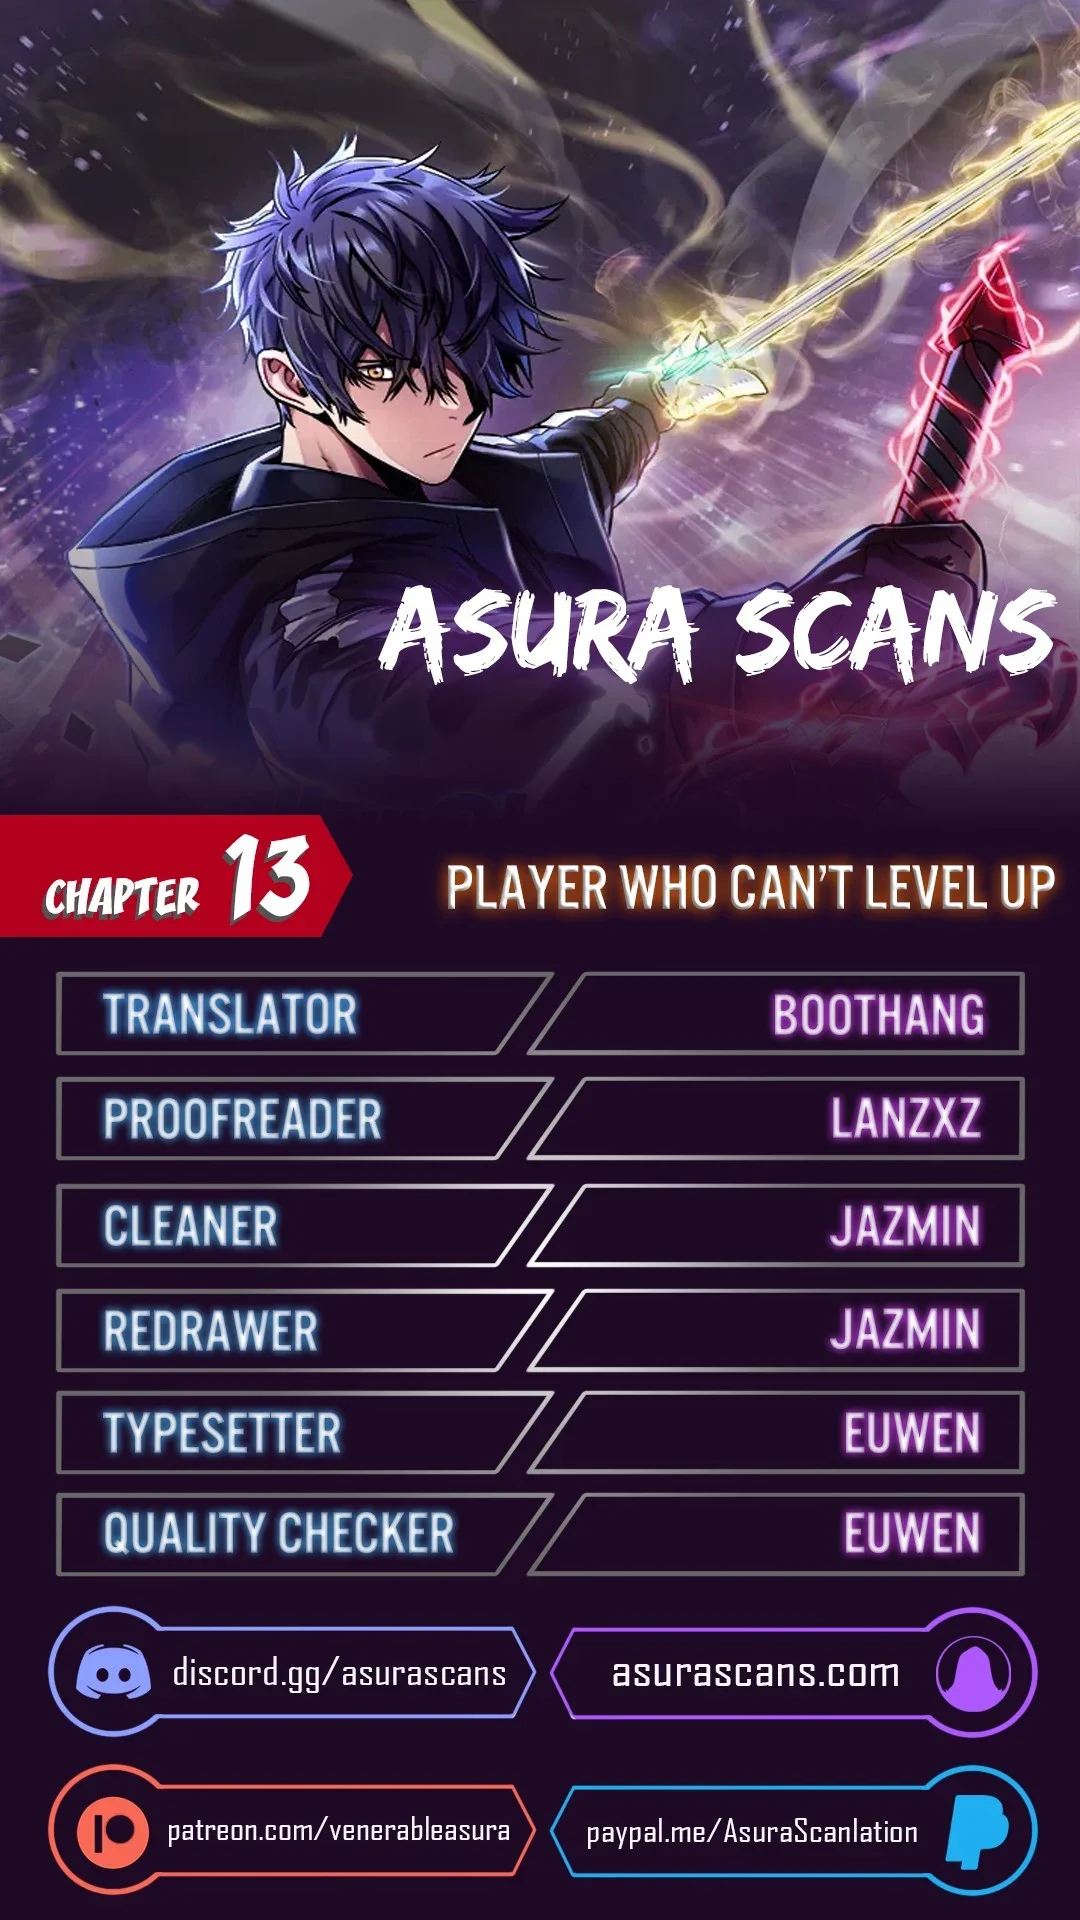 player-who-cant-level-up-chap-13-0